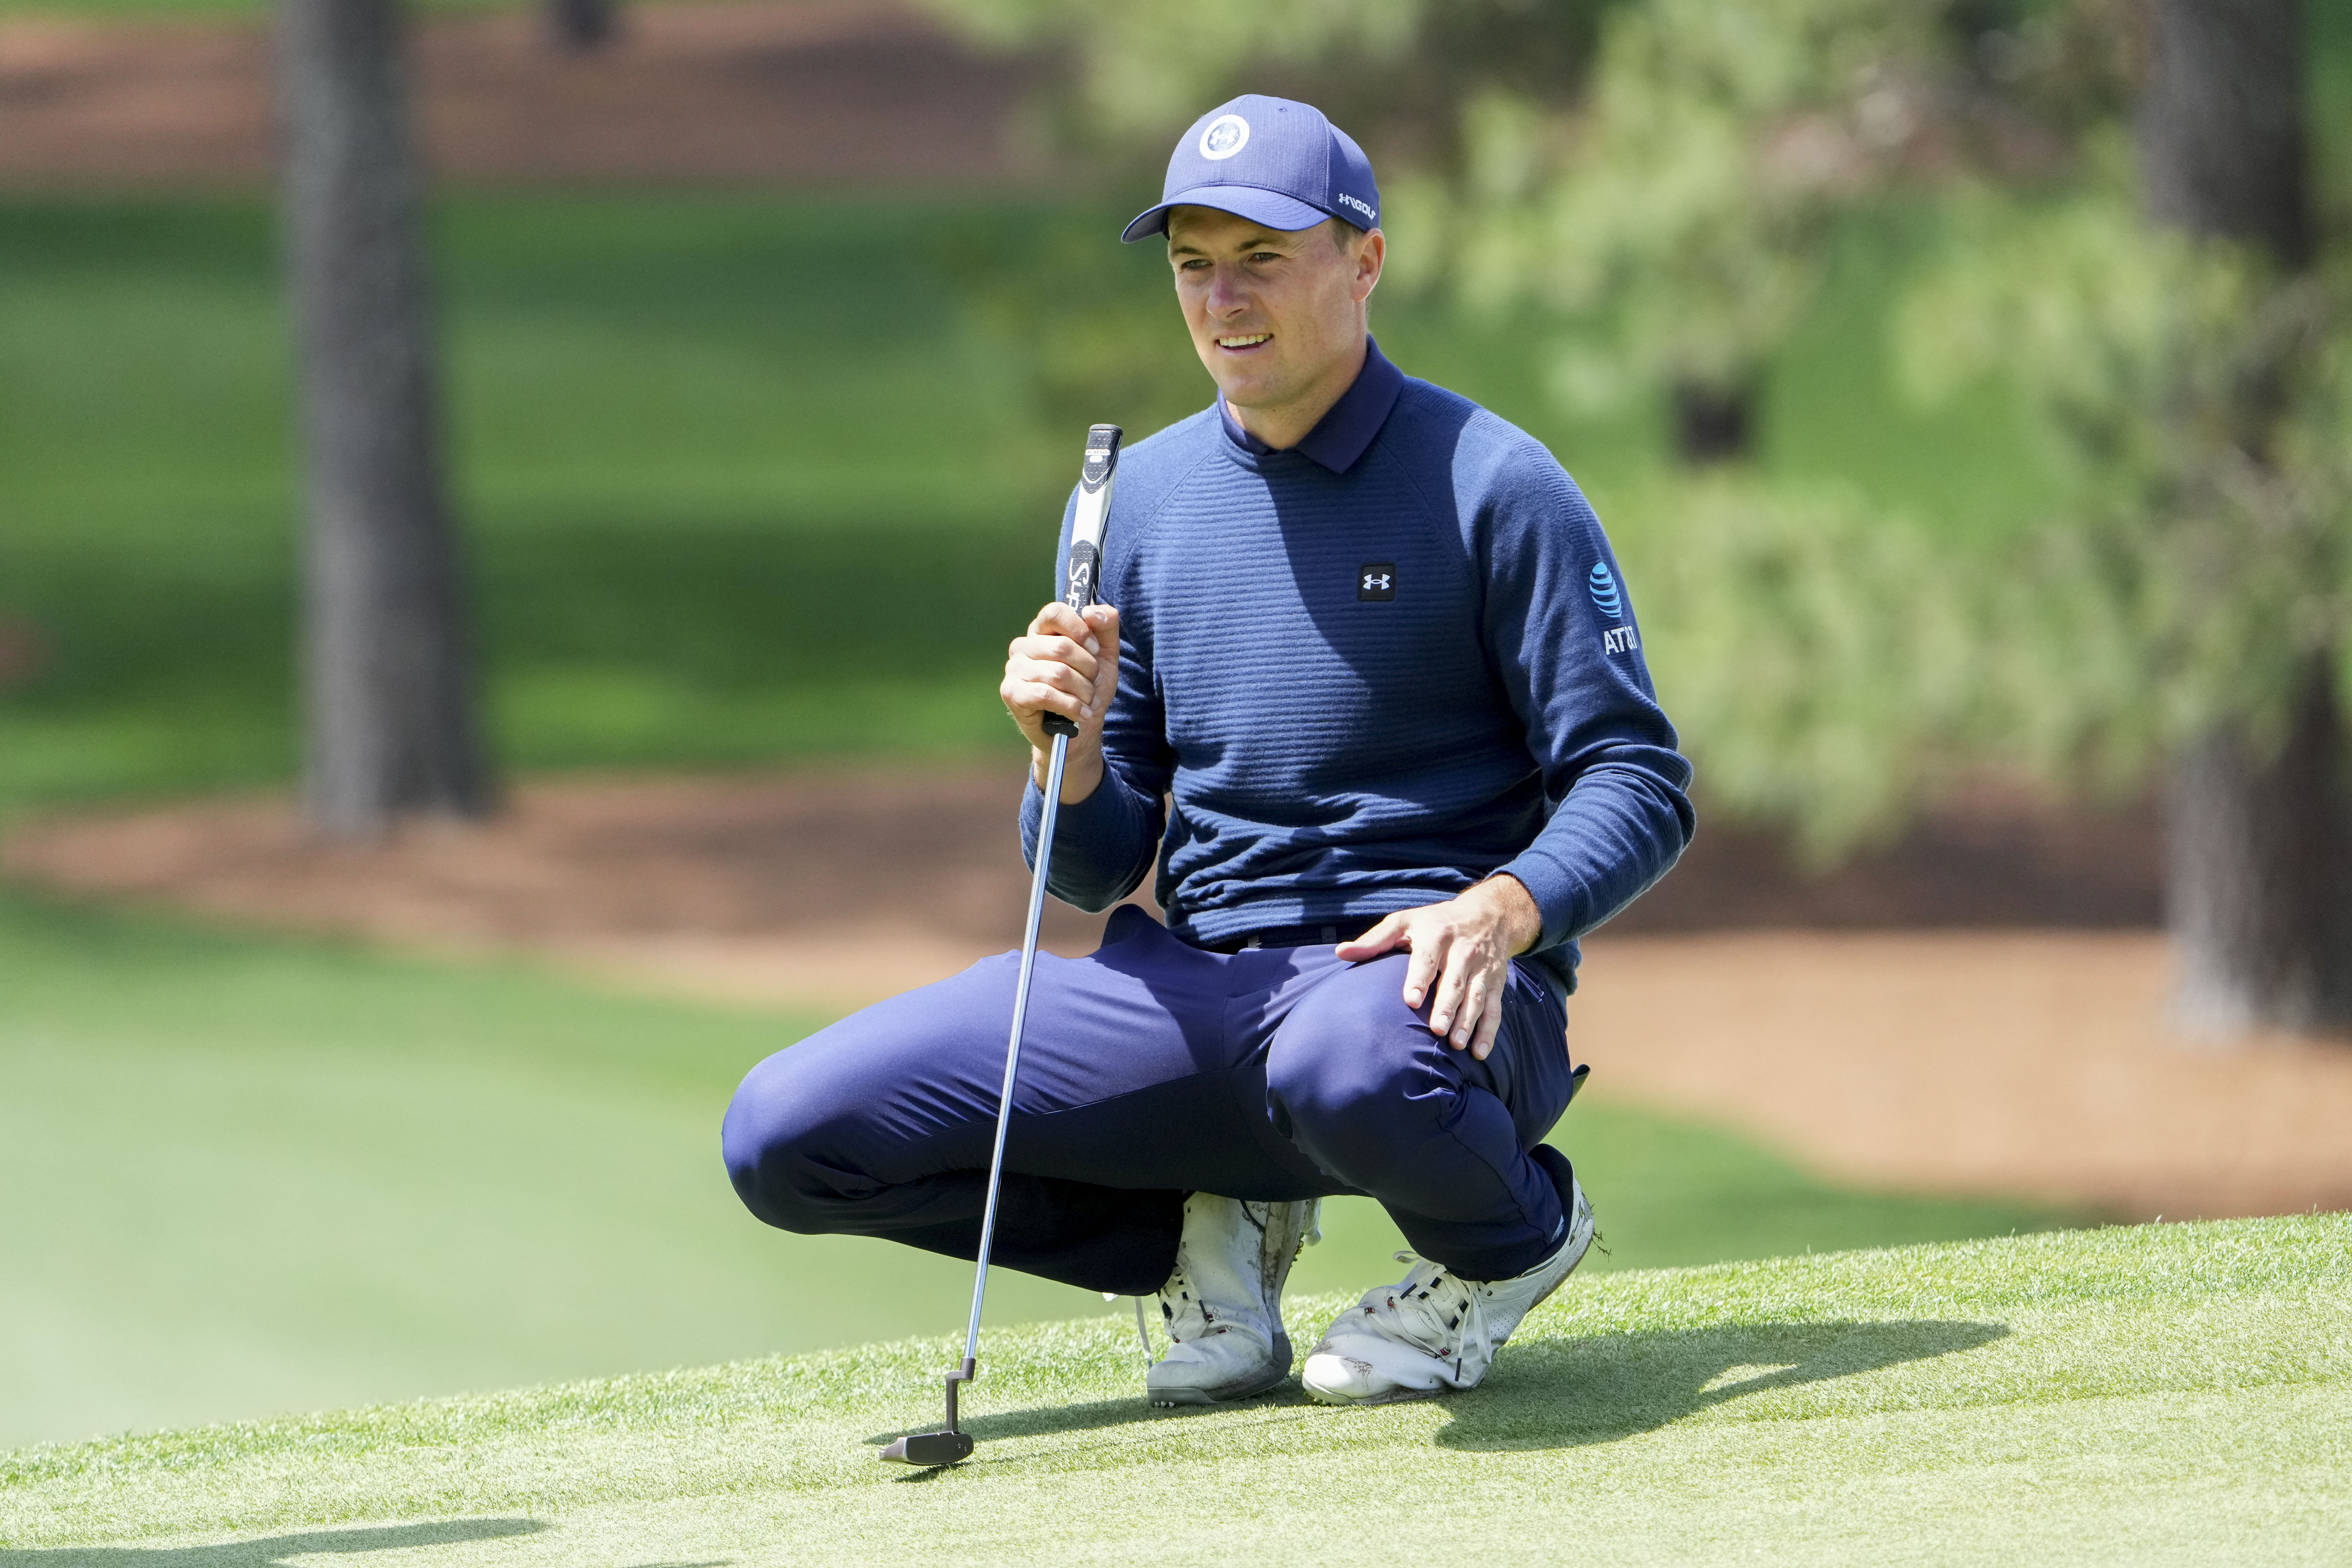 ‘Fatigued’ Jordan Spieth happy to be near top at Masters, but contemplating a future schedule change